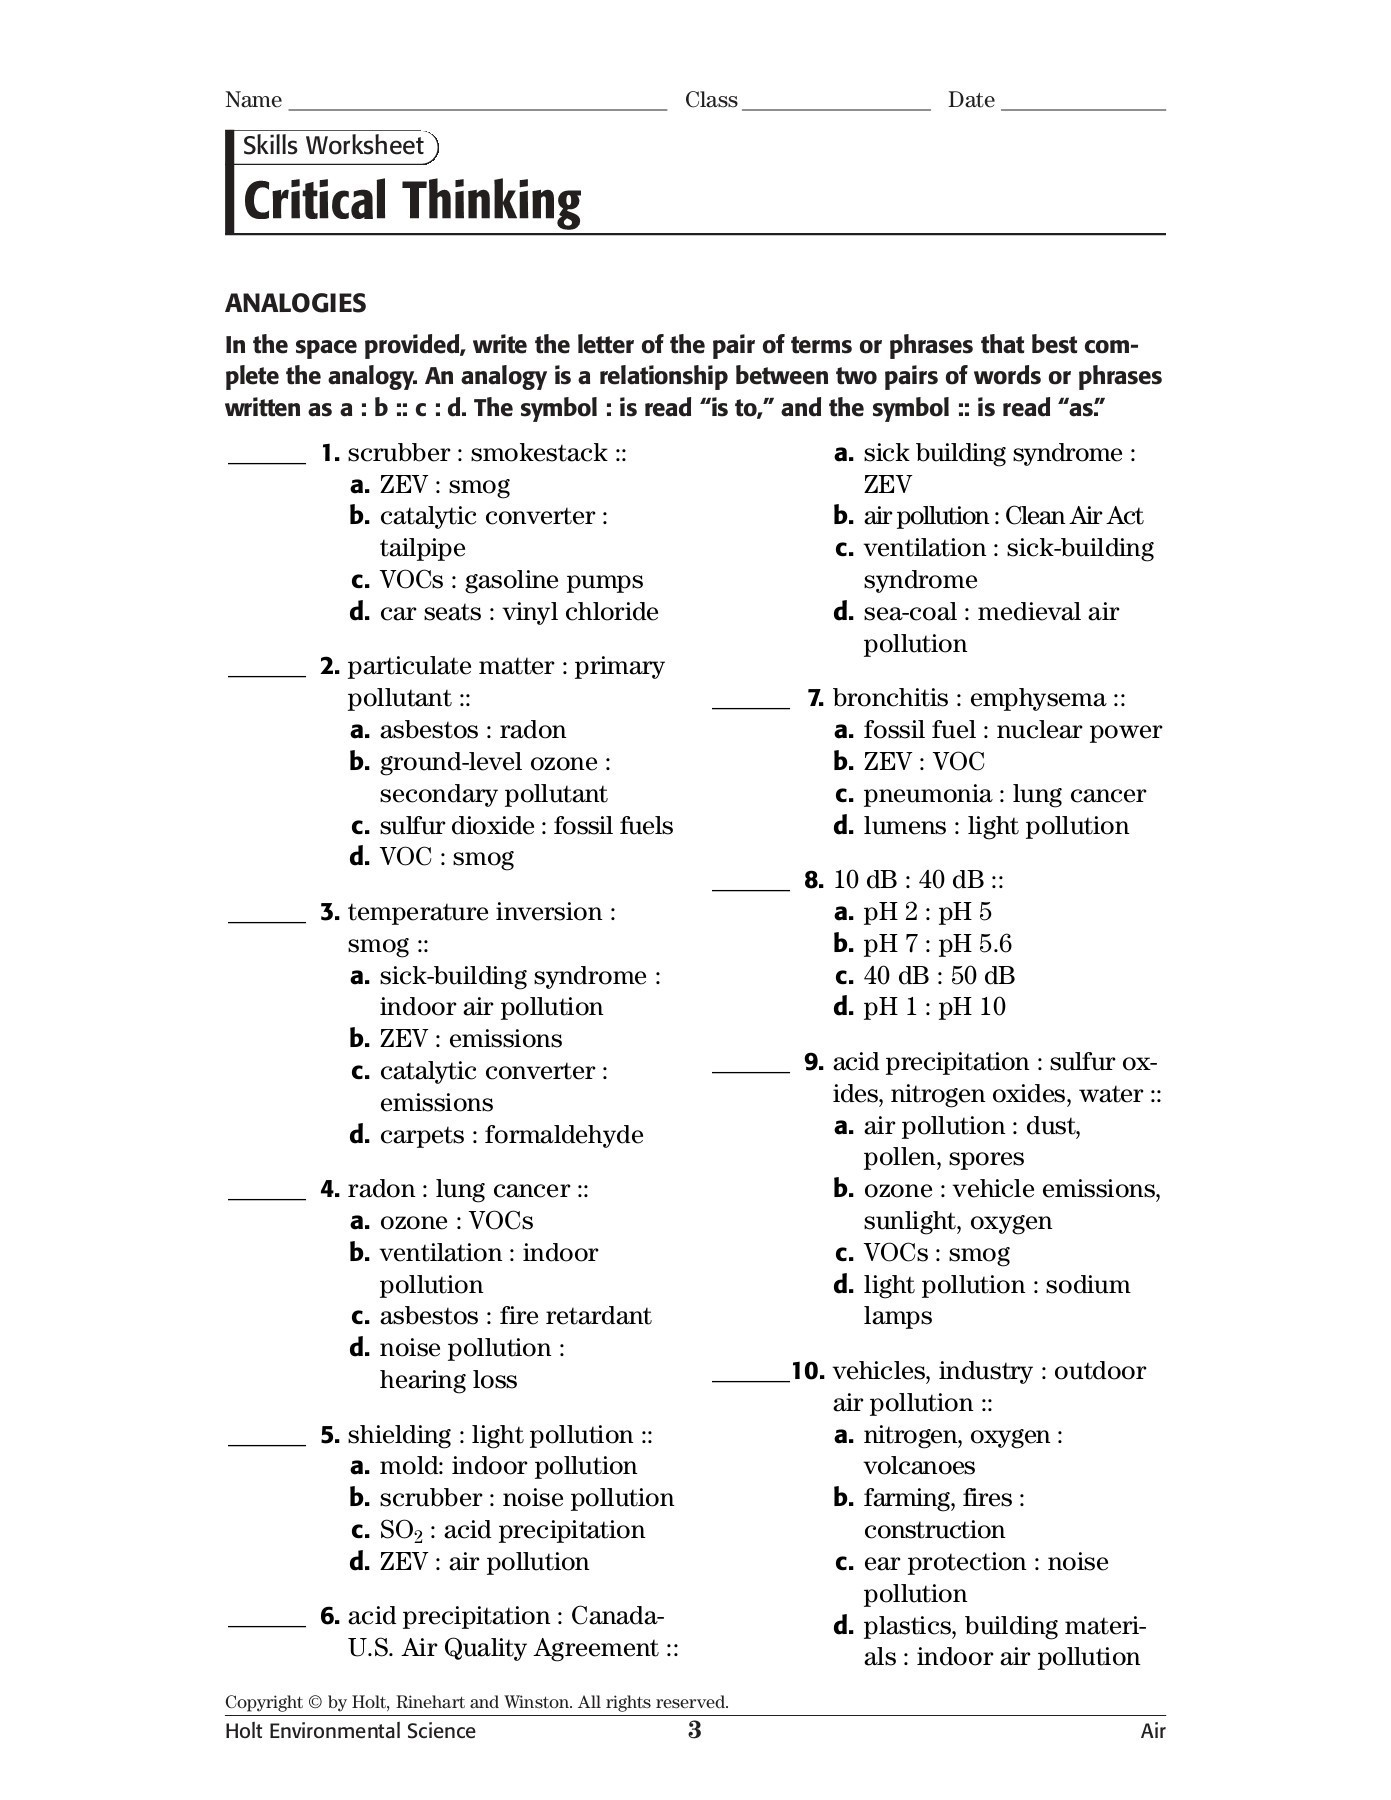 Science Skills Worksheet Answer Key Skills Worksheet Critical Thinking Wikispaces Pages 1 4